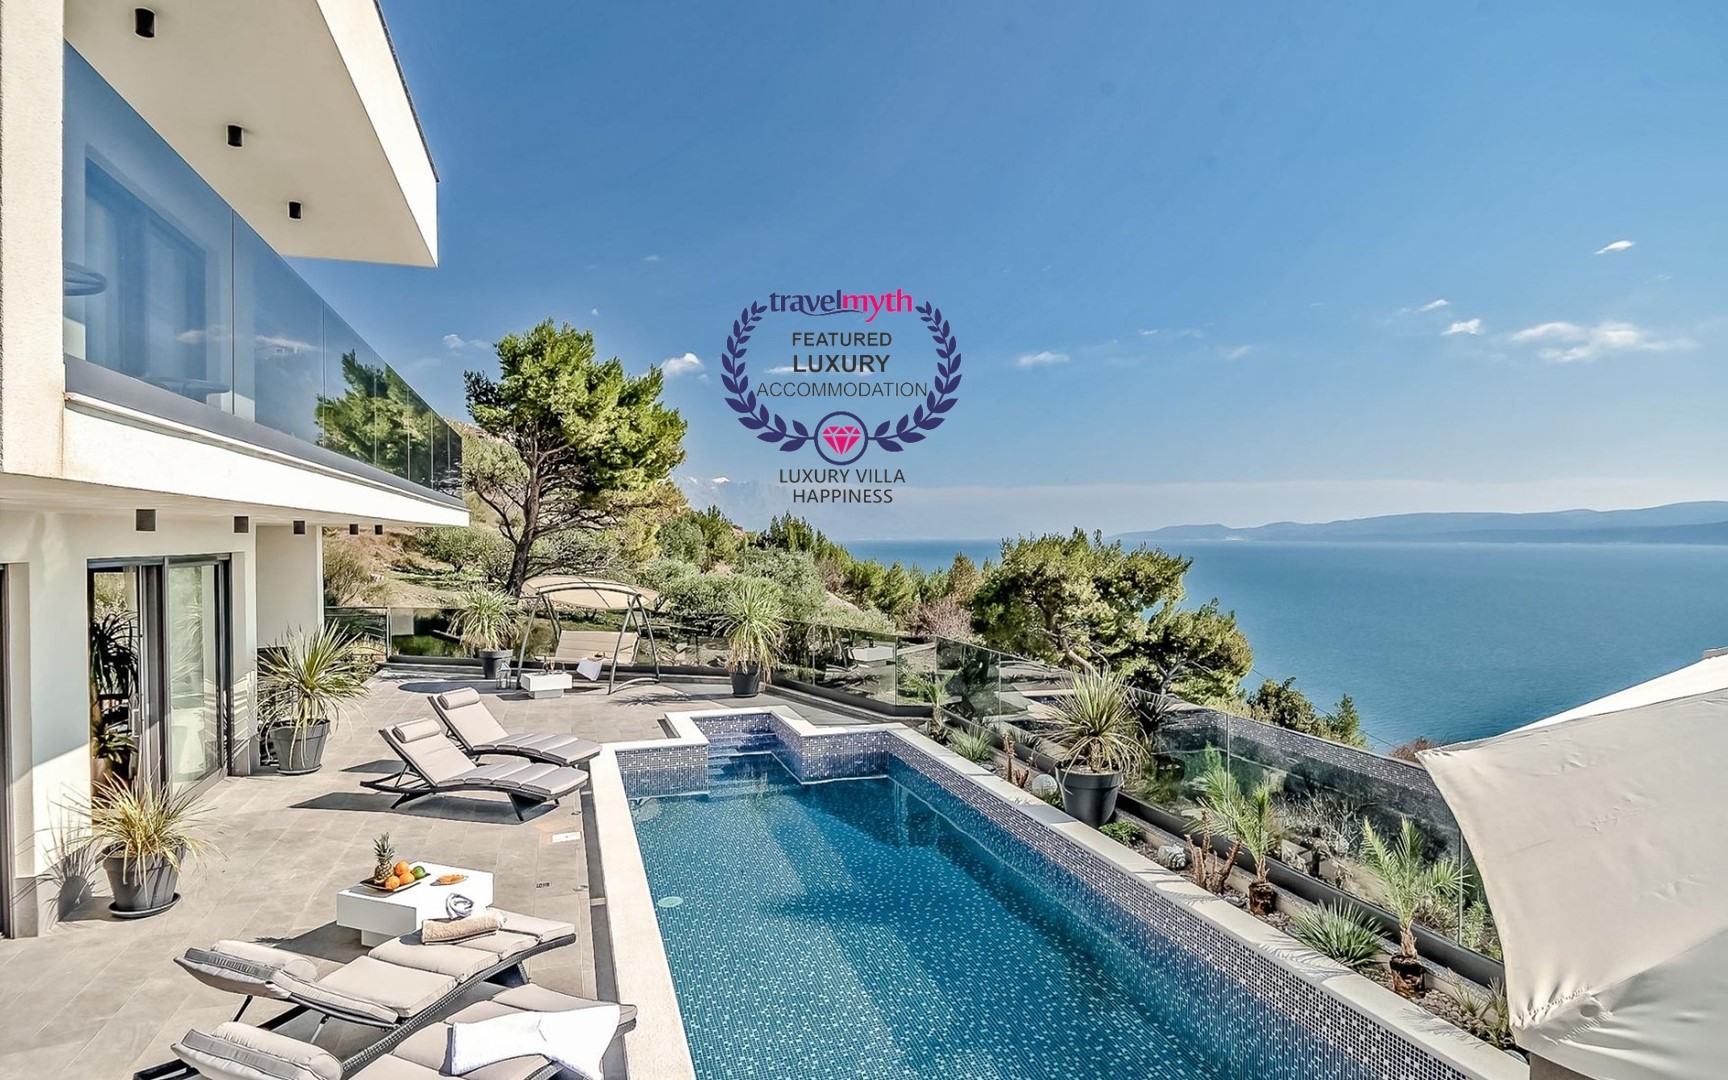 Spacious fenced terrace with private pool surrounded by sun loungers and seaview from the property of the luxury villa Happiness